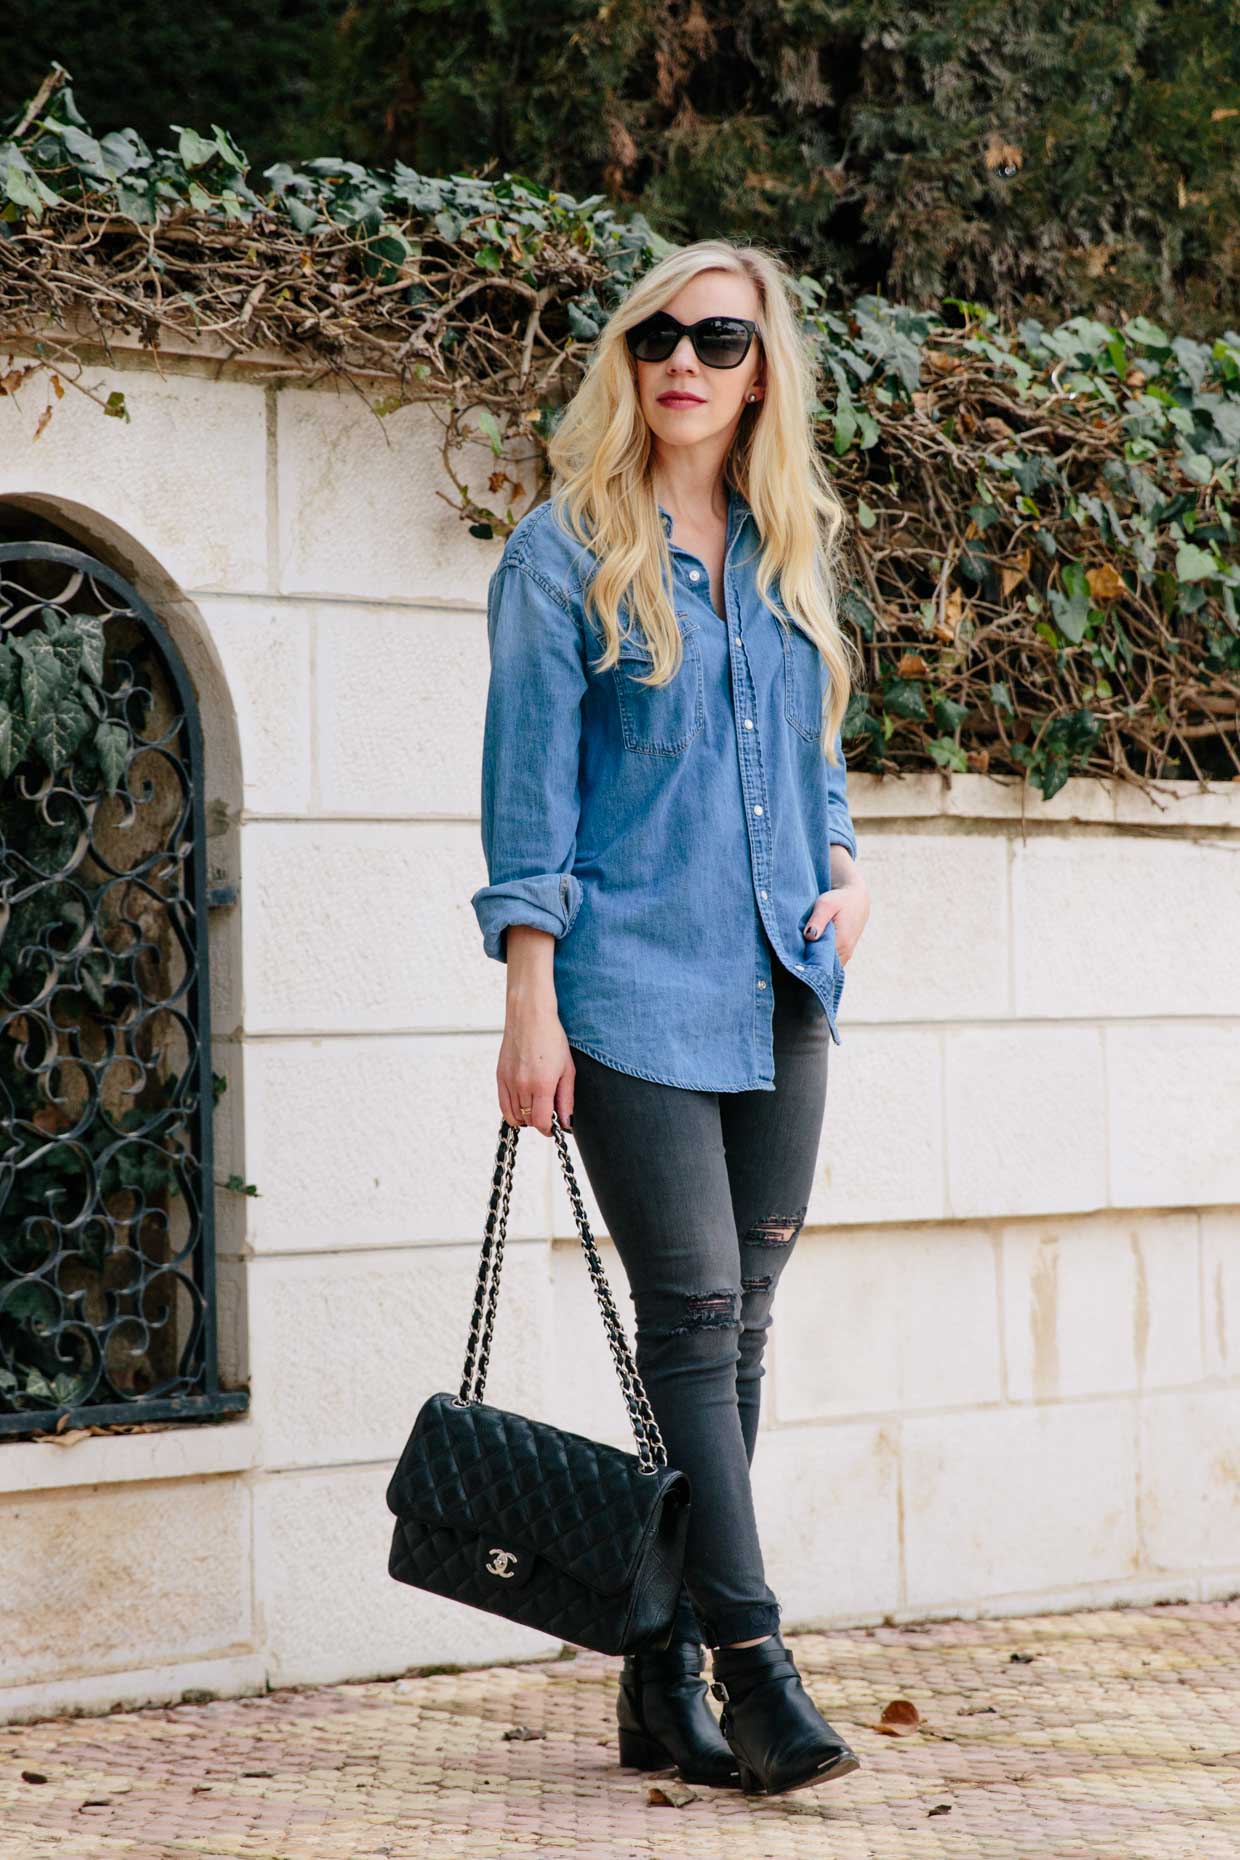 Meagan Brandon fashion blogger of Meagan's Moda wears oversized denim shirt  with black distressed jeans and black Chelsea boots, oversized denim shirt  outfit - Meagan's Moda